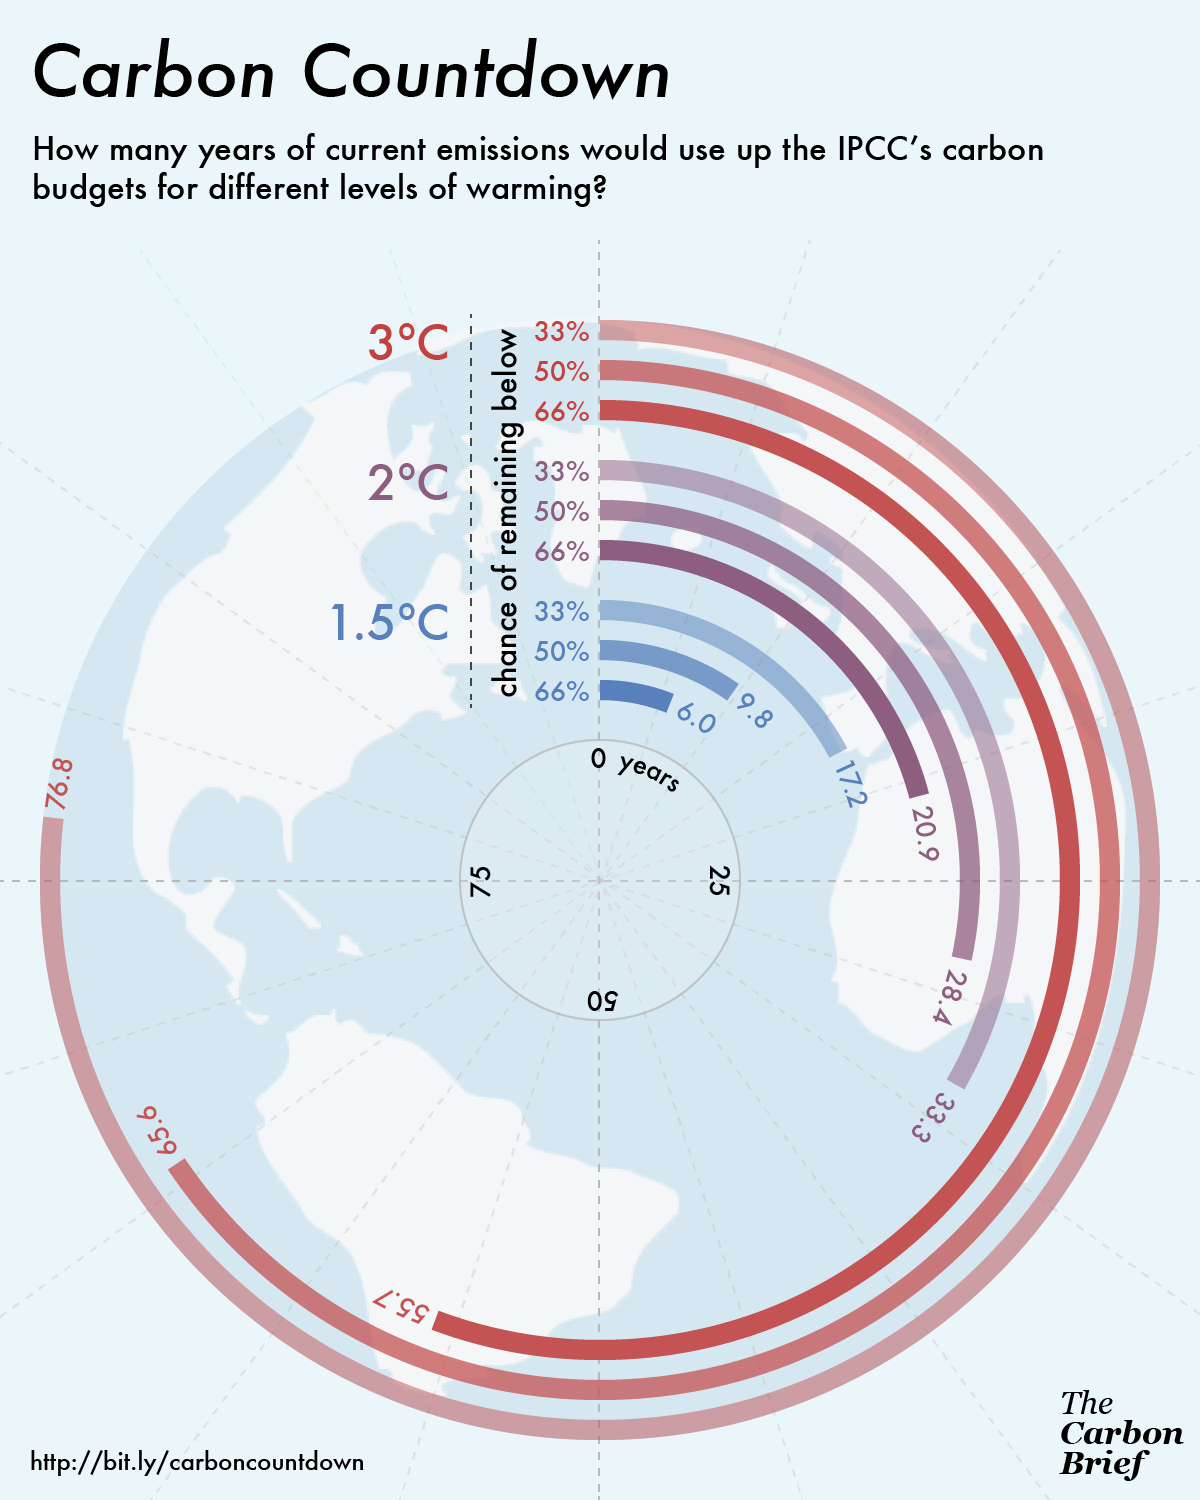 Carbon budget countdown infographic for different levels of warming